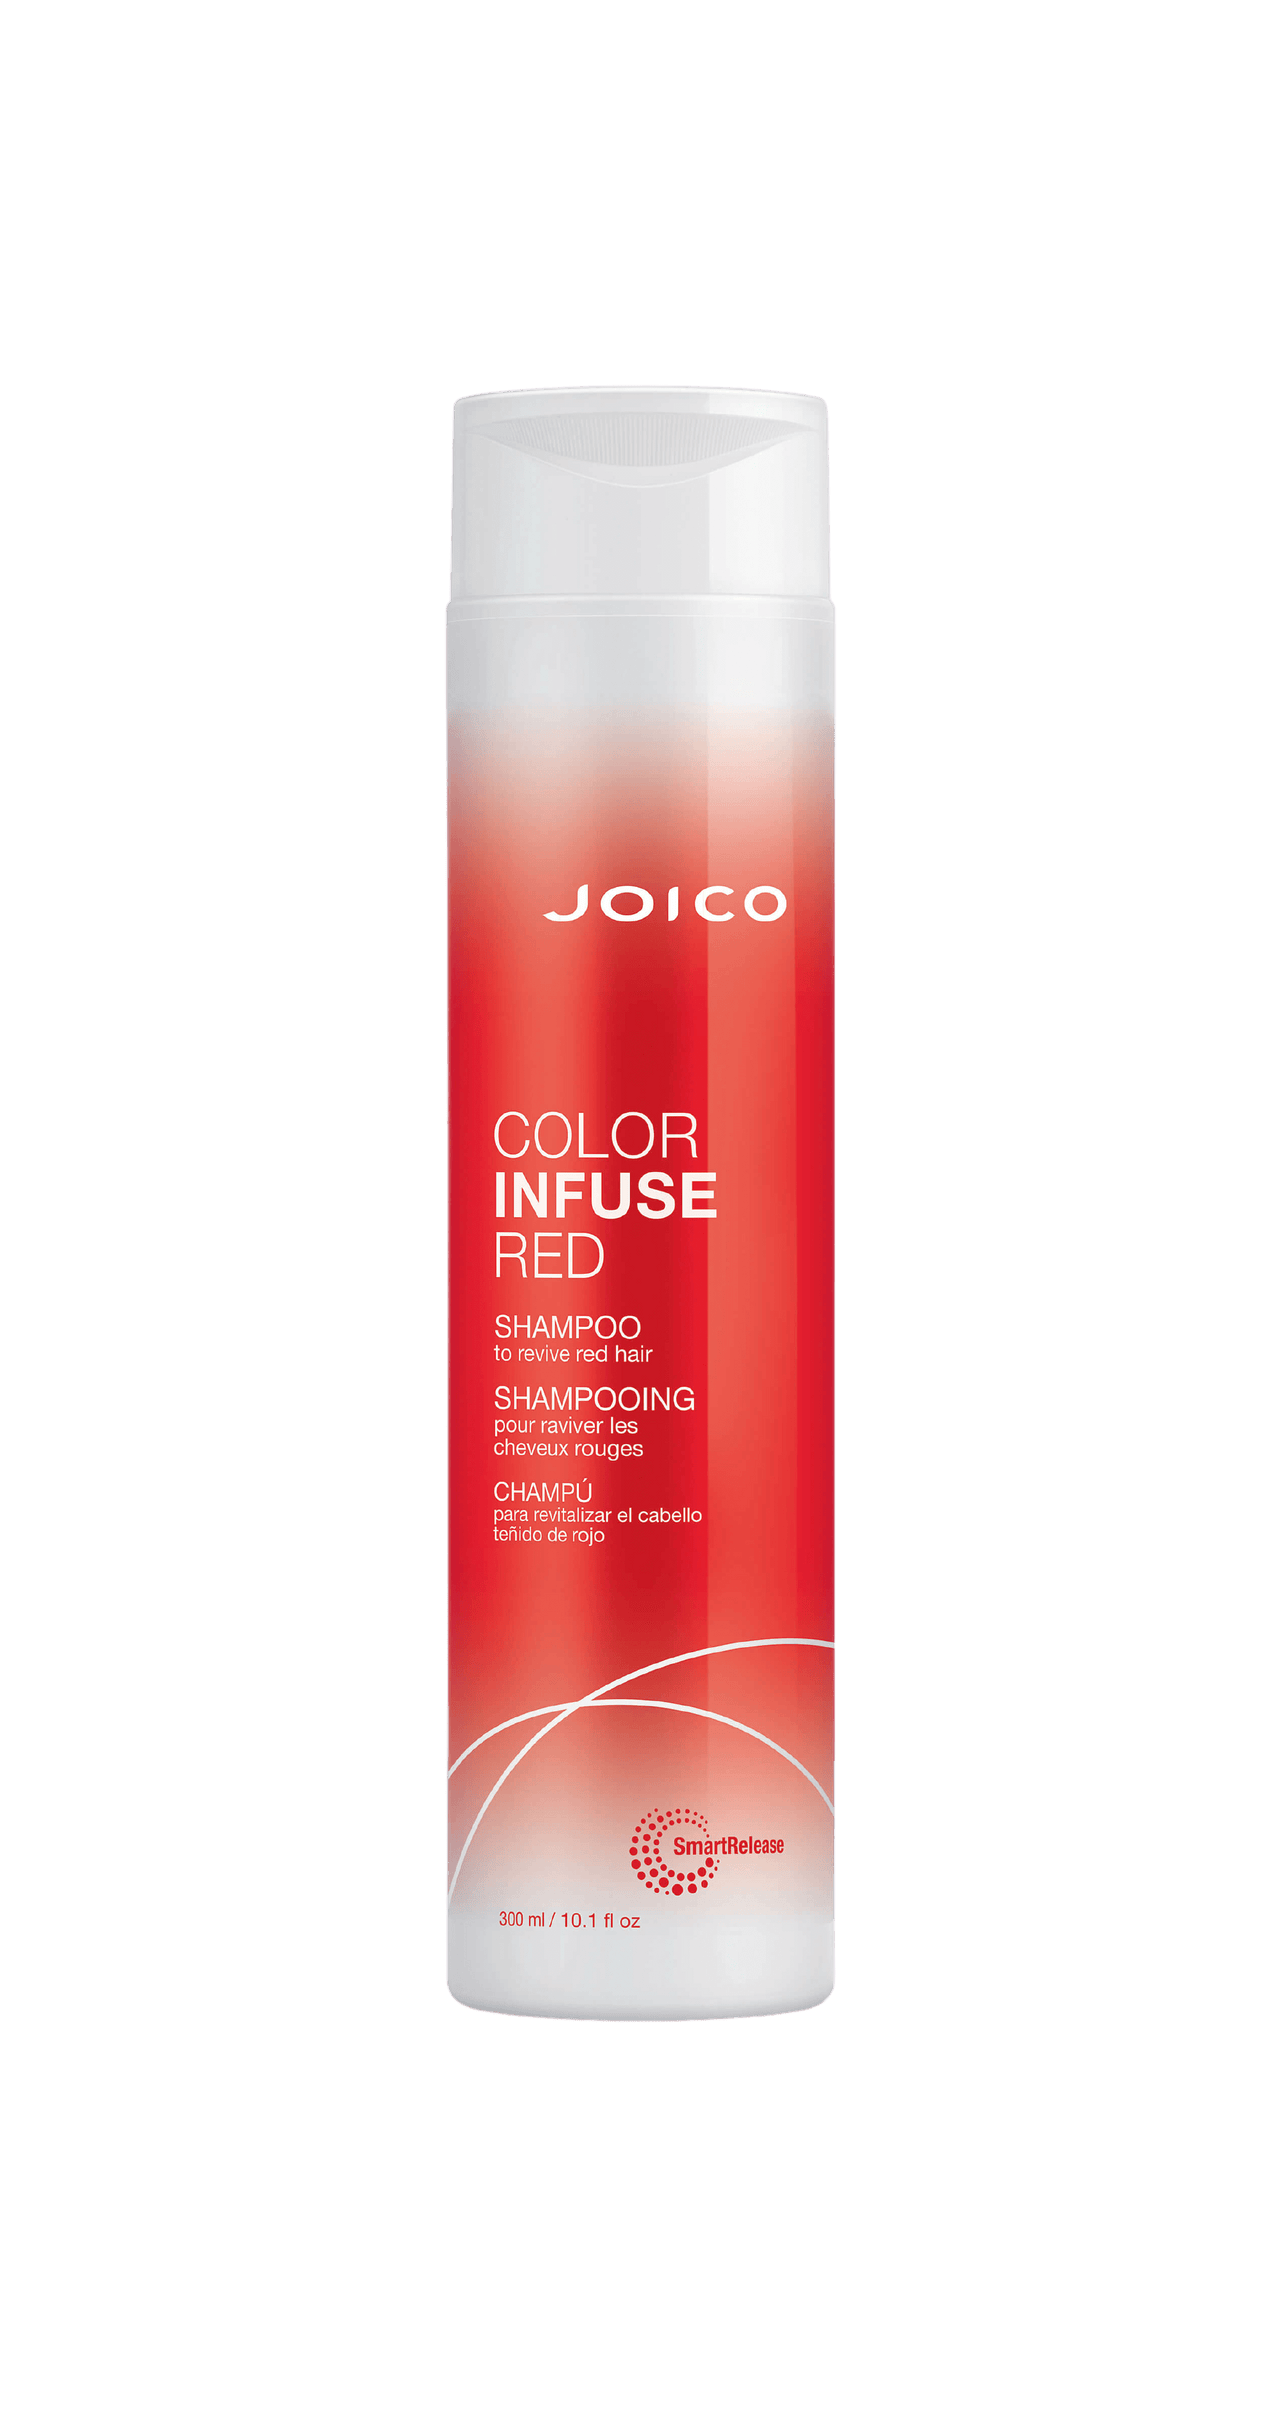 Joico Color Infuse Red Shampoo 300mL Bottle